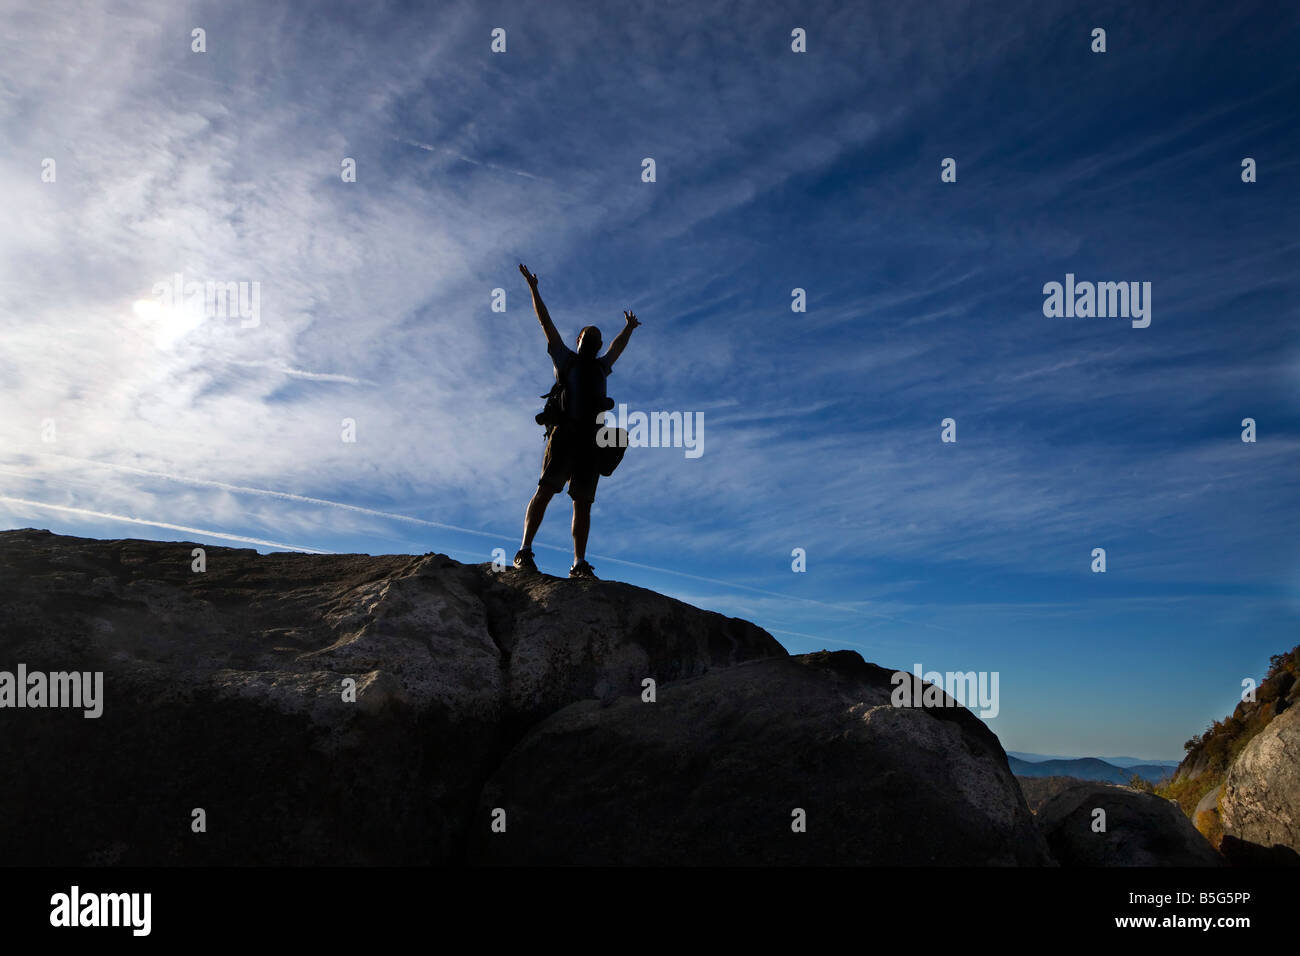 Silohuette of a man with arms raised above his head against a deep blue sky Old Rag Mountain  Shenandoah National Park, VA Stock Photo